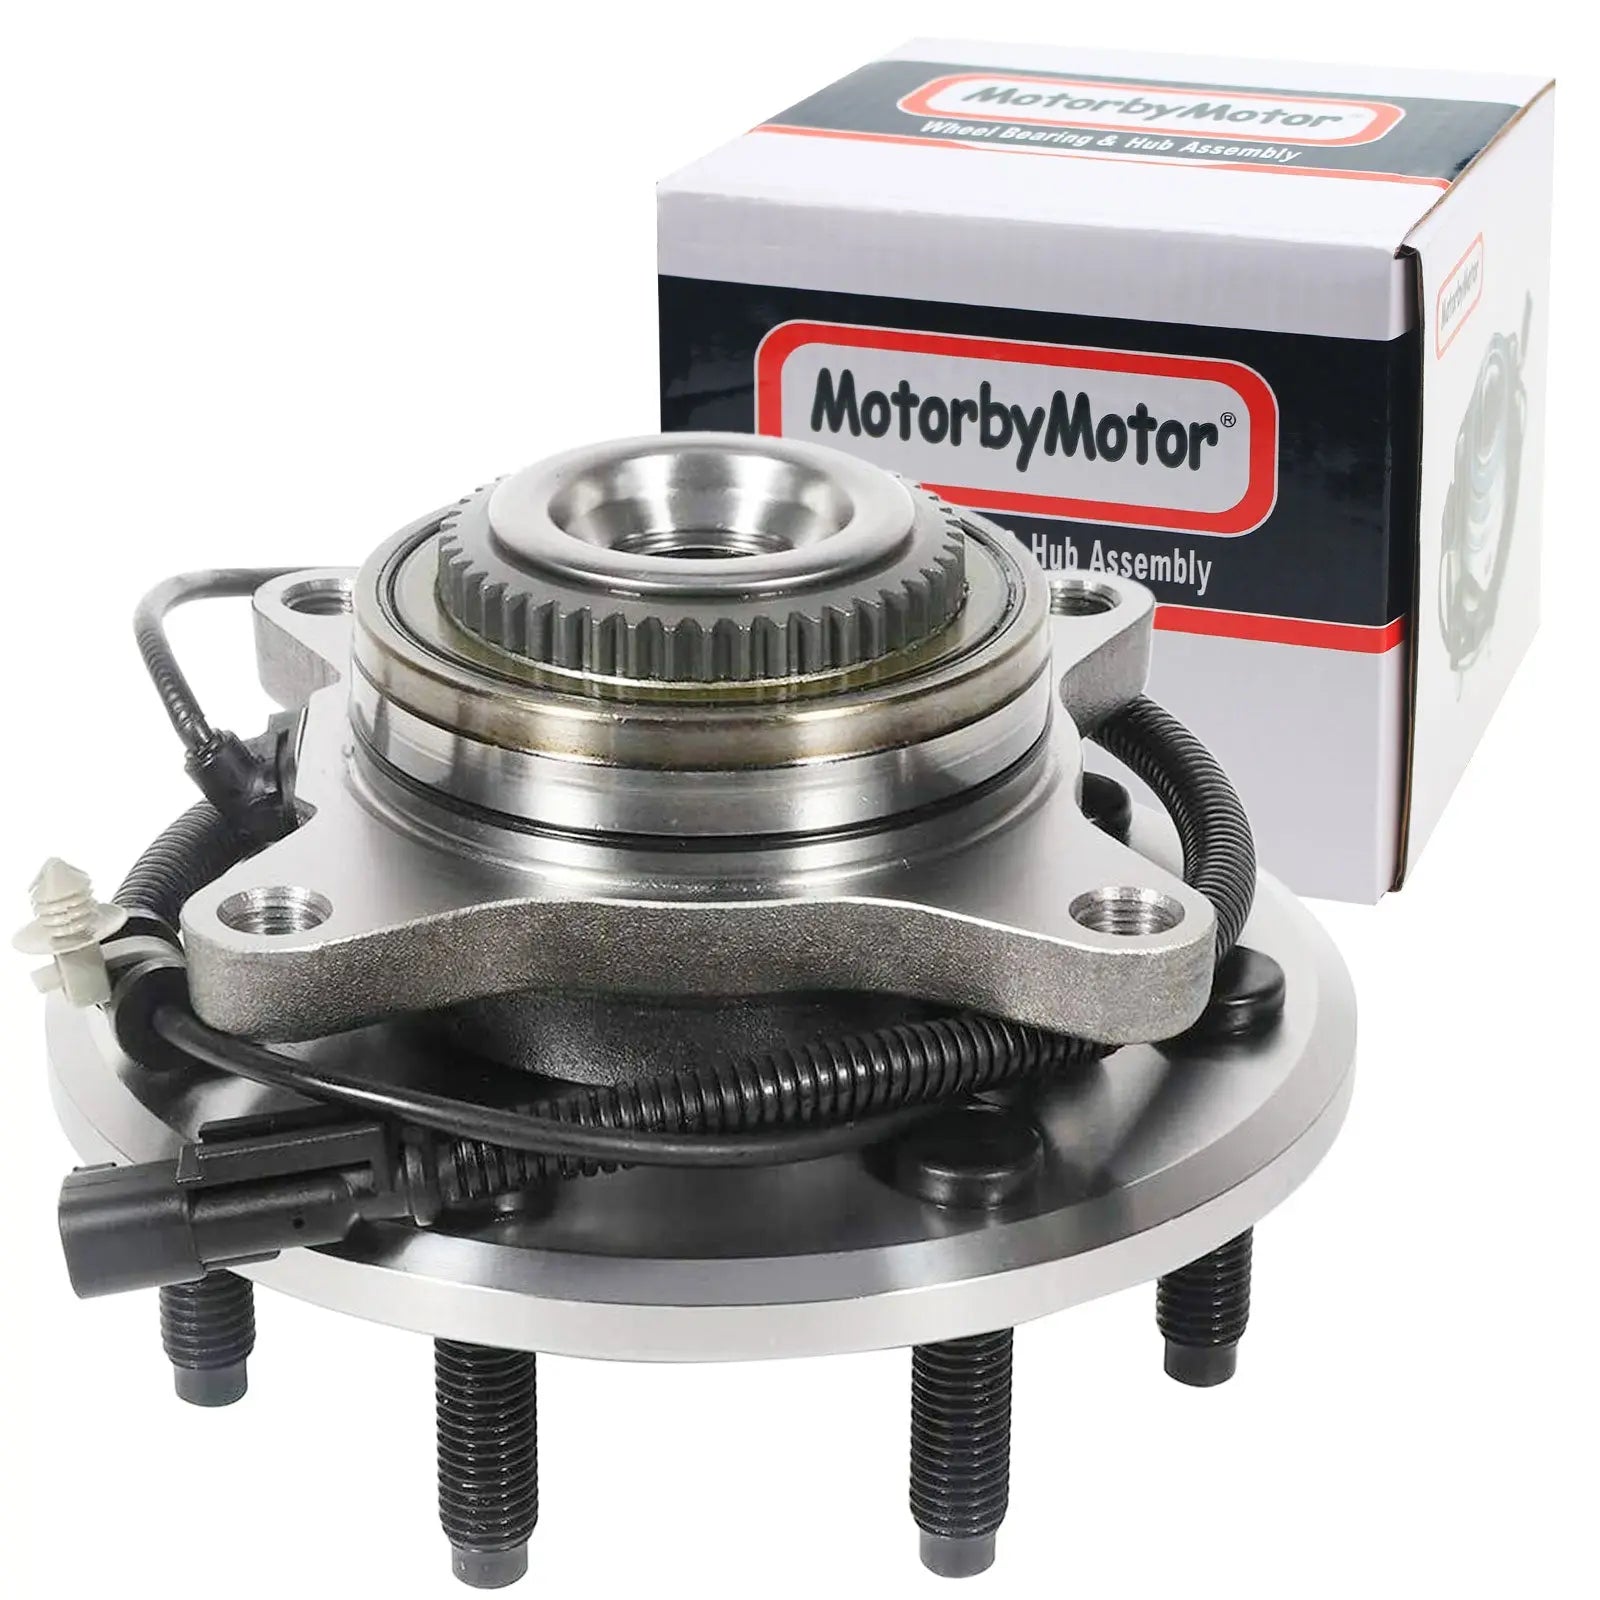 MotorbyMotor 513326 Front Wheel Bearing and Hub Assembly with 7 Lugs Fits for Ford F-150 2011-2014 Hub Bearing Assembly (w/ABS, 2WD 4WD Heavy Duty Payload) MotorbyMotor